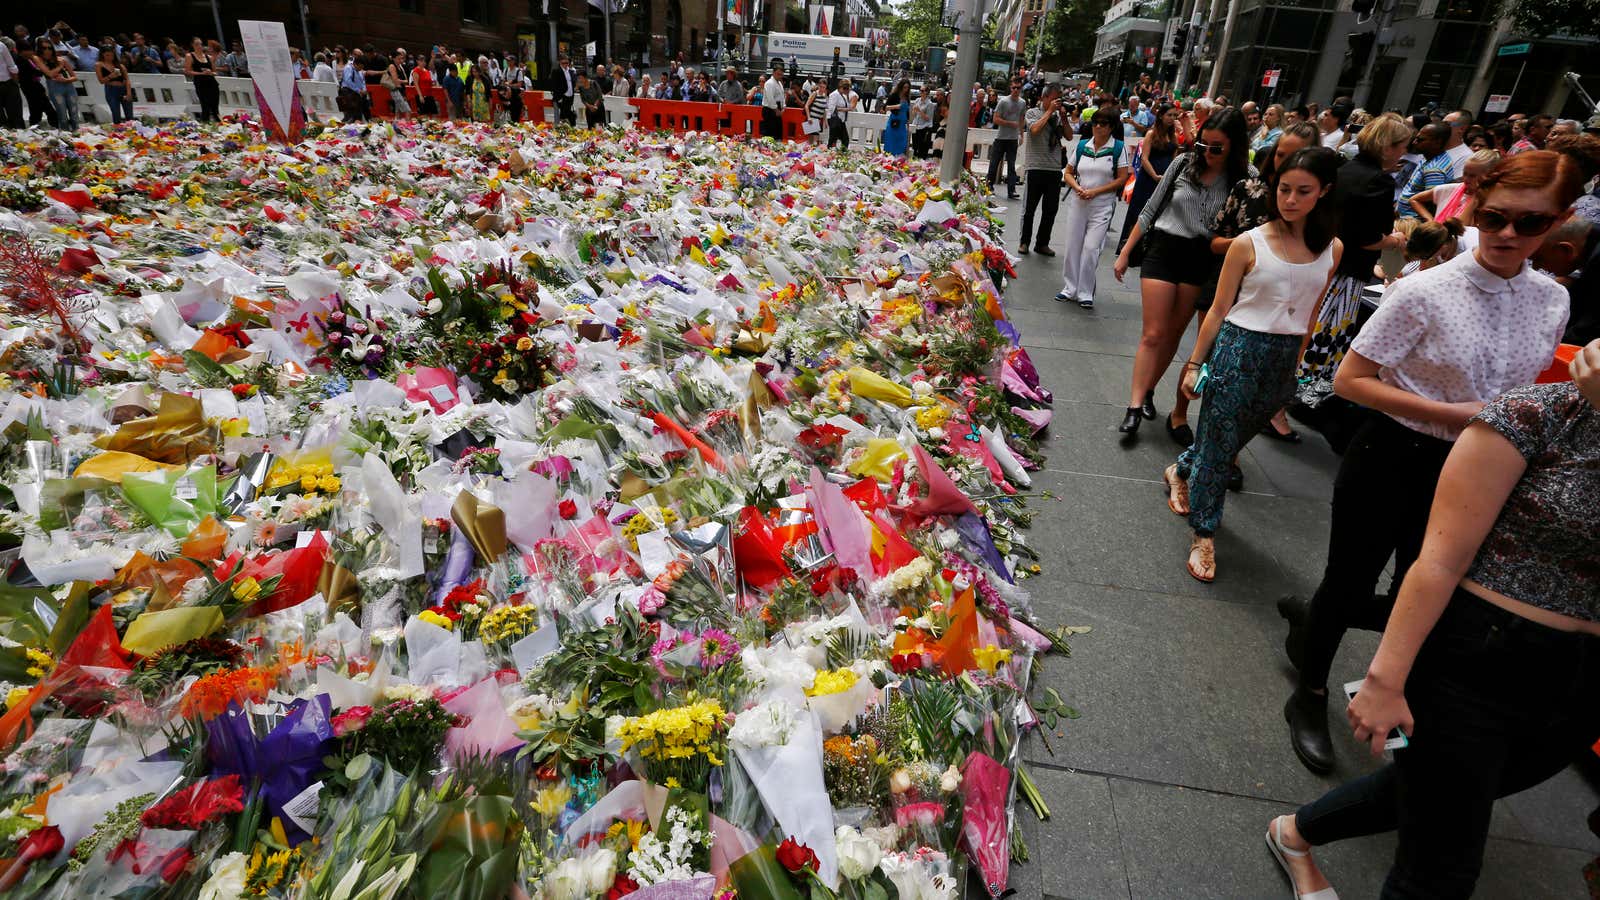 After the attack in Sydney, Australia, in December 2014.